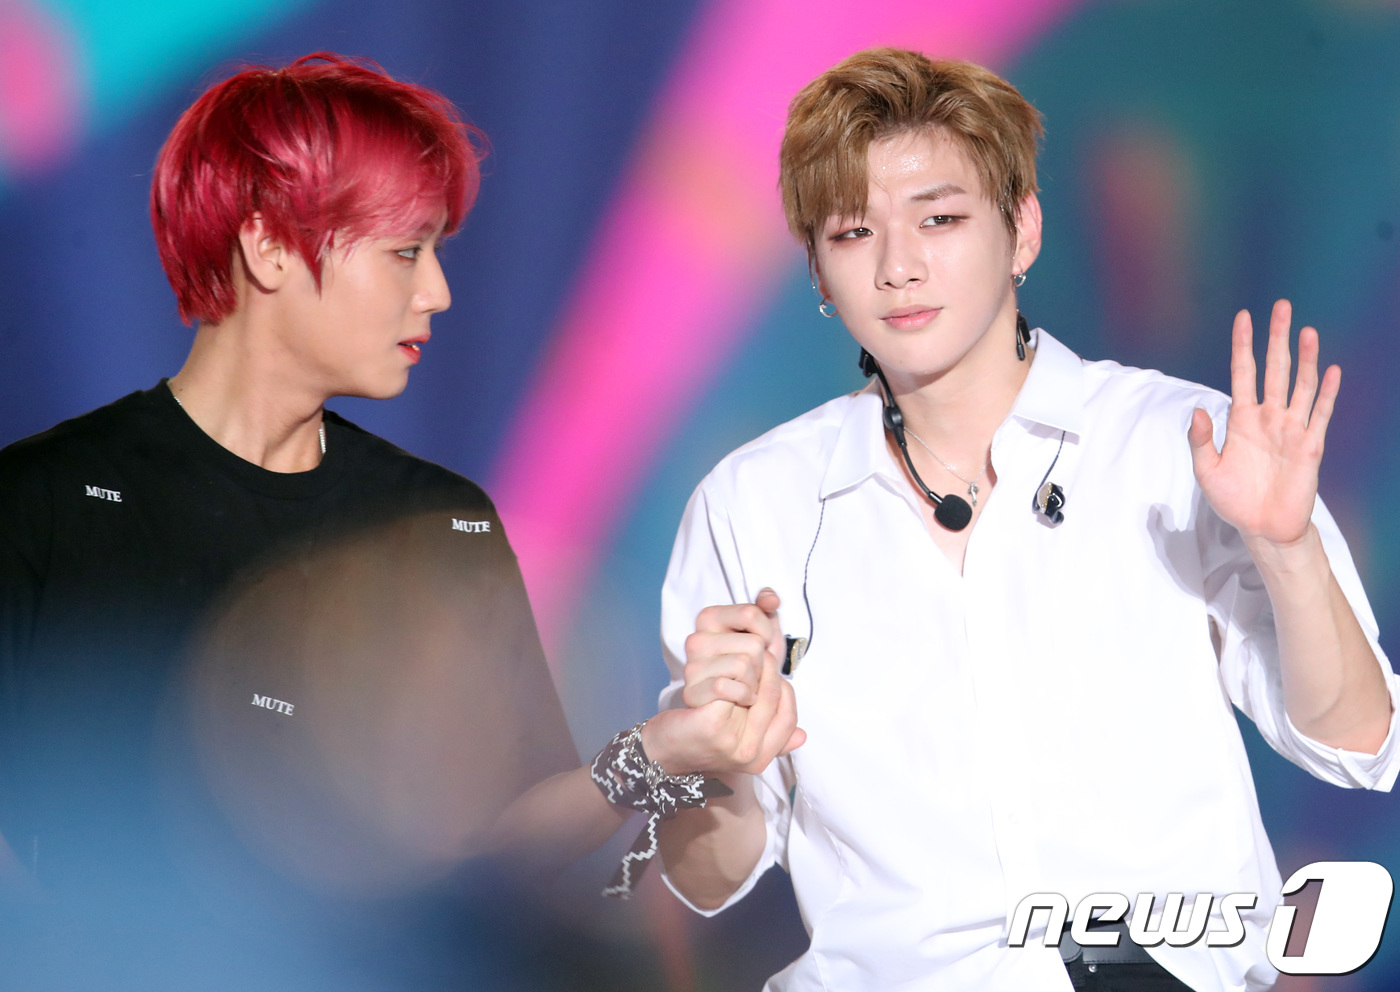 Seoul = = Wanna One Park Jihoon and Kang Daniel (right) greet each other at the 2018 Korea Music Festival (comufe) held at Gocheok Sky Dome in Guro-gu, Seoul on the afternoon of the 1st.August 2, 2018.